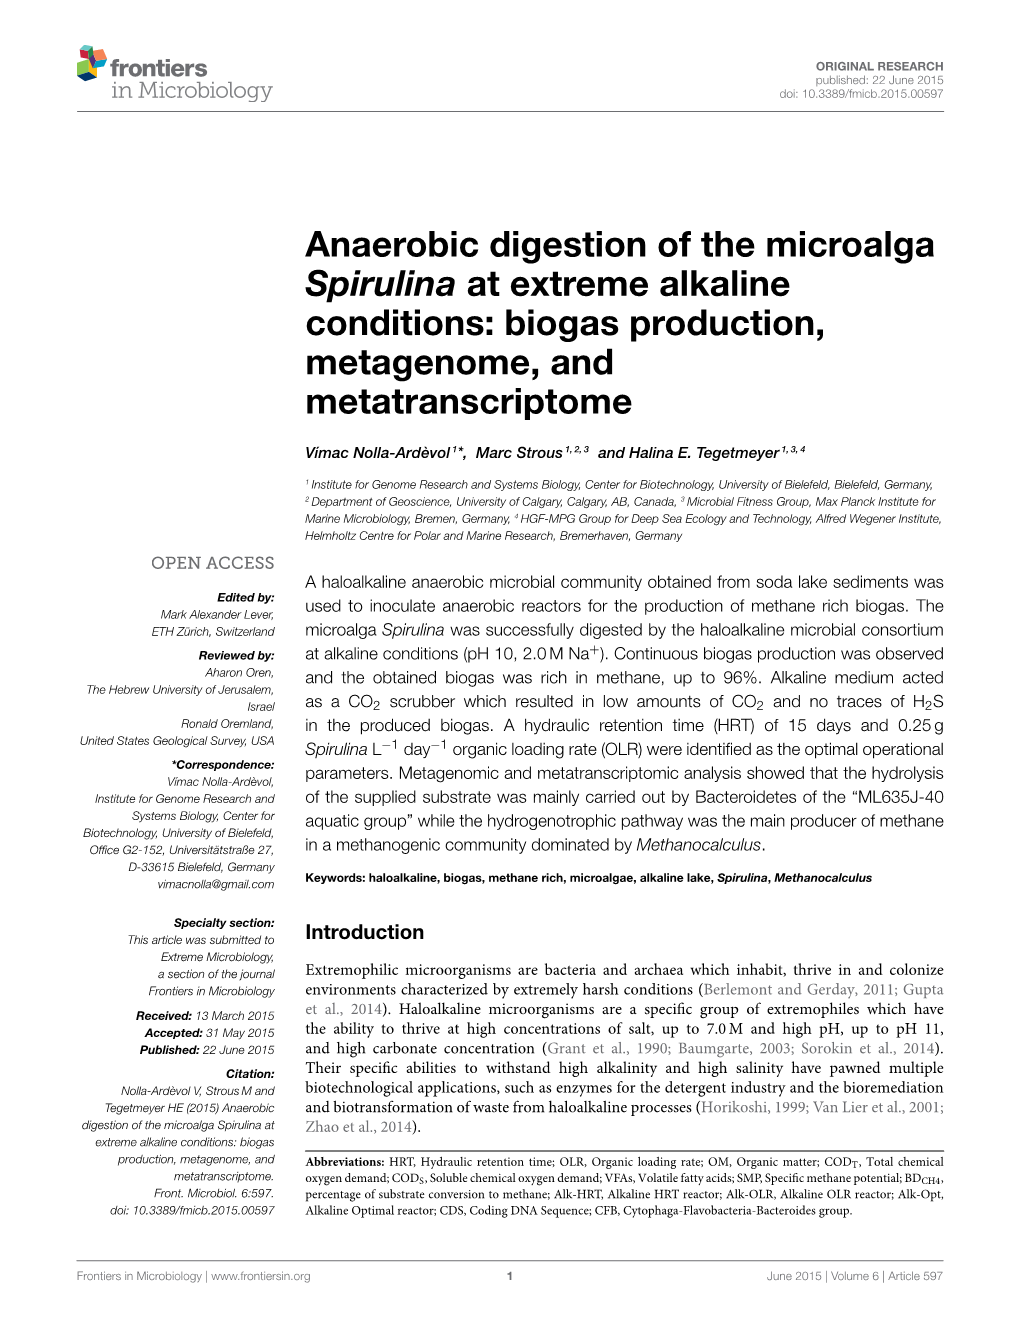 Anaerobic Digestion of the Microalga Spirulina at Extreme Alkaline Conditions: Biogas Production, Metagenome, and Metatranscriptome